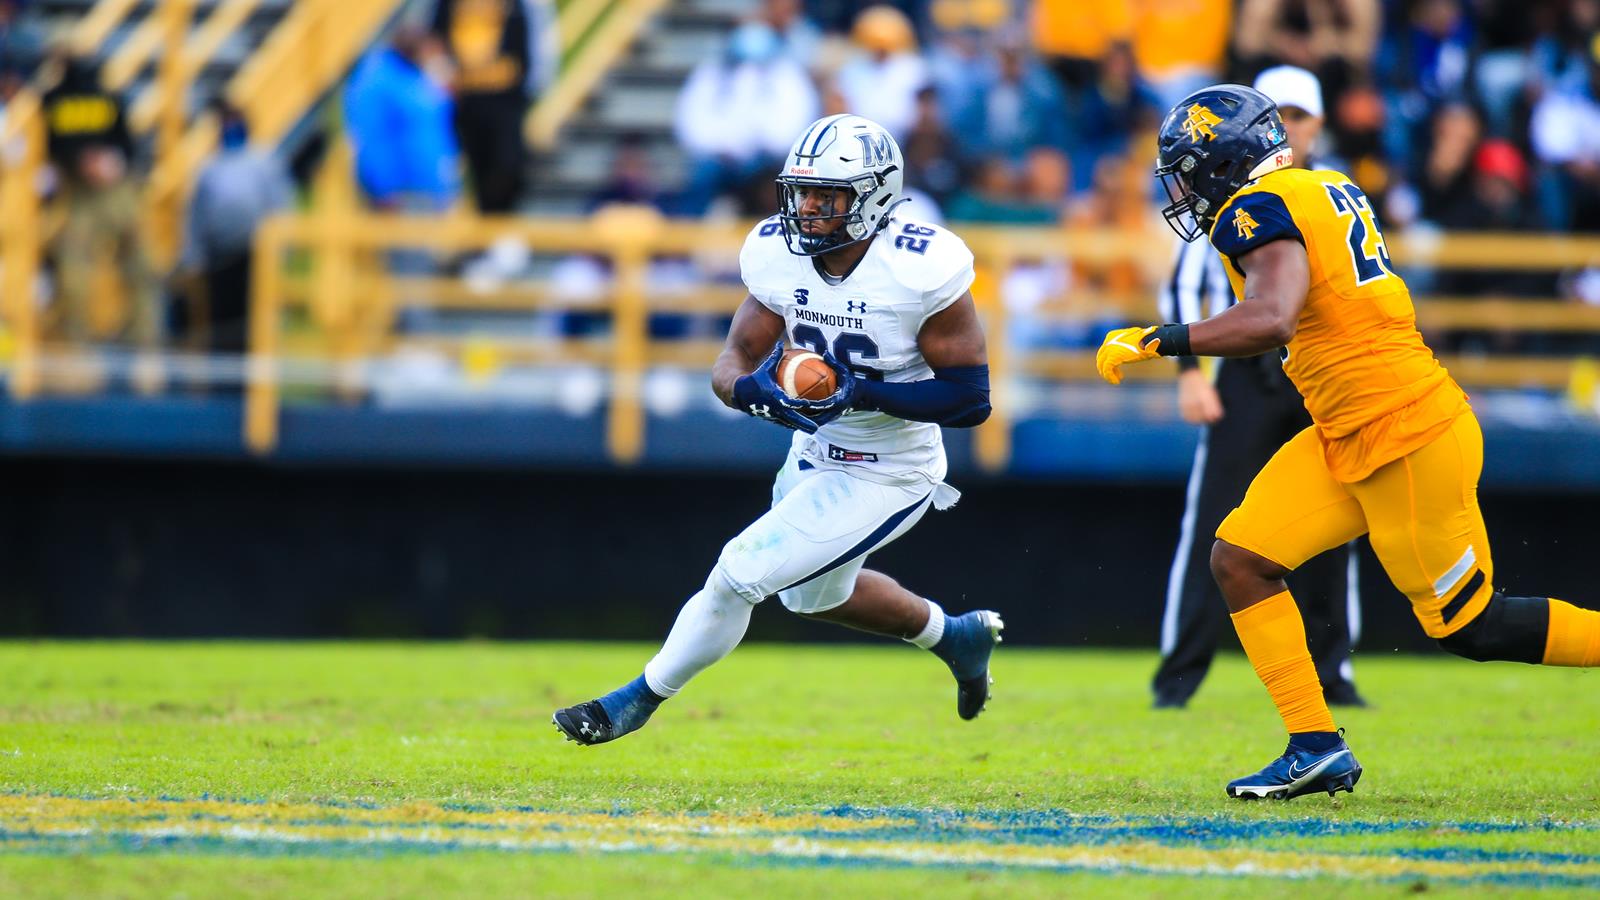 Commanders Scouting Monmouth RB, Grandson of Washington Legend